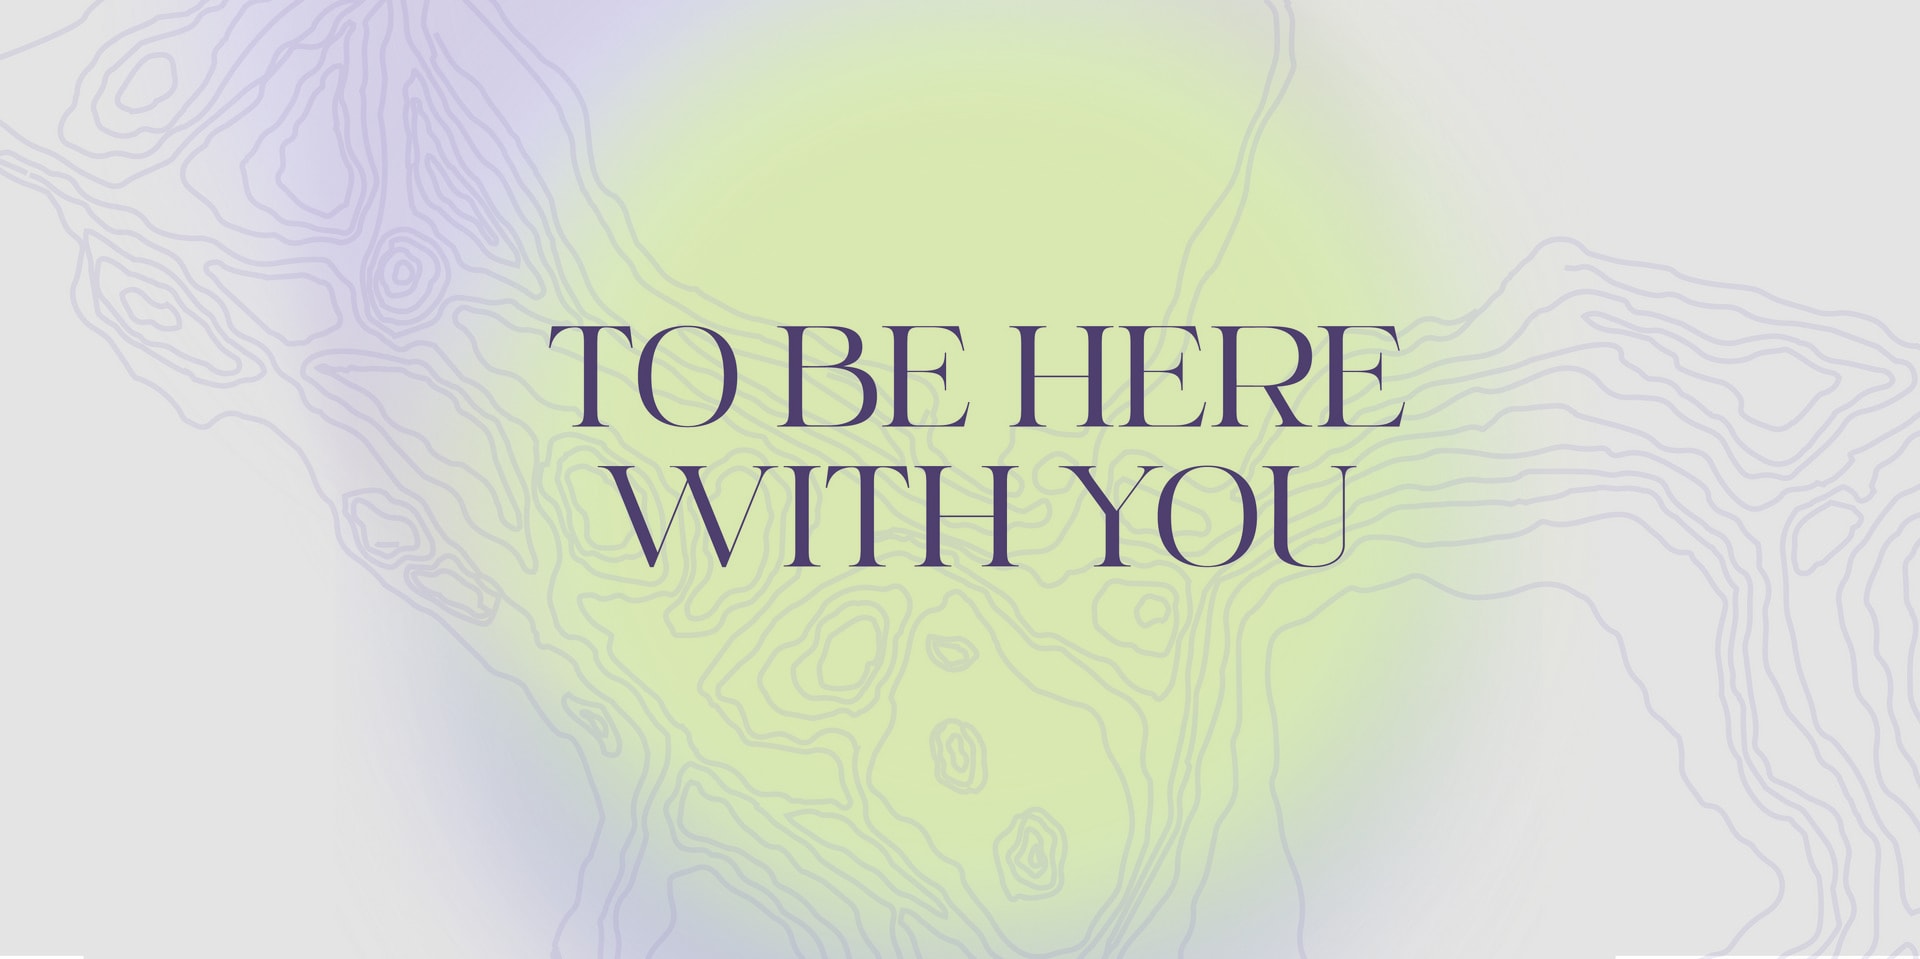 e-bulletin: To be here with you